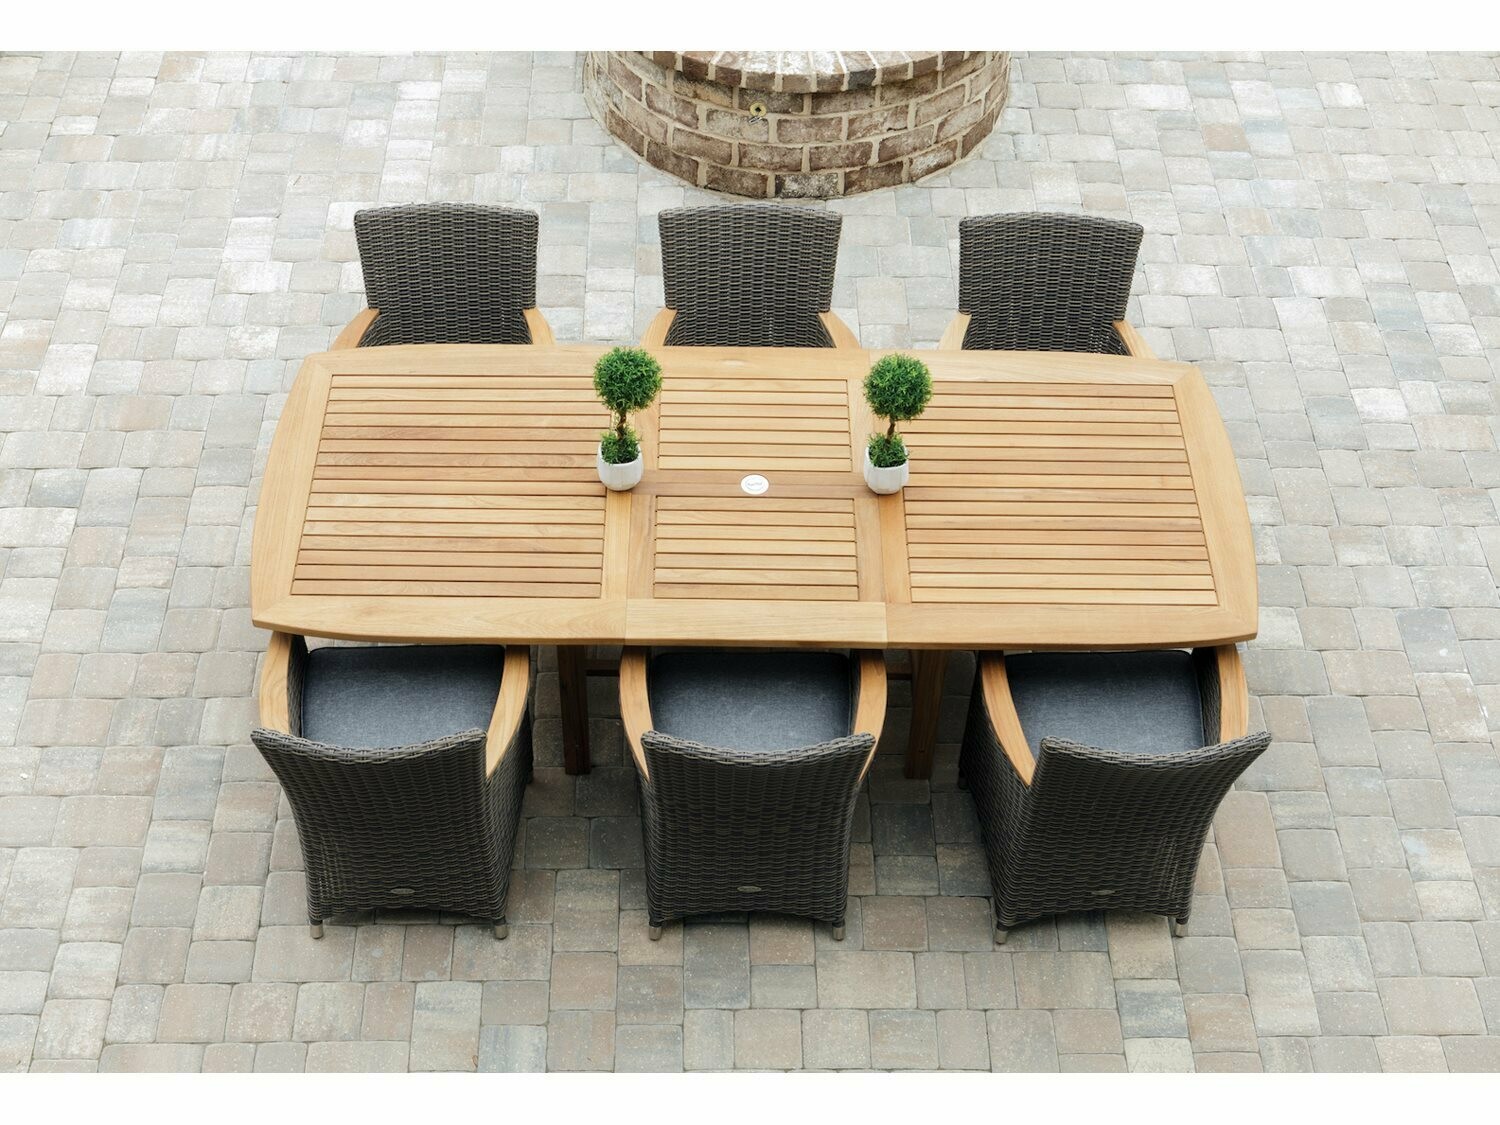 Royal Teak Collection Helena Wicker Dining Set